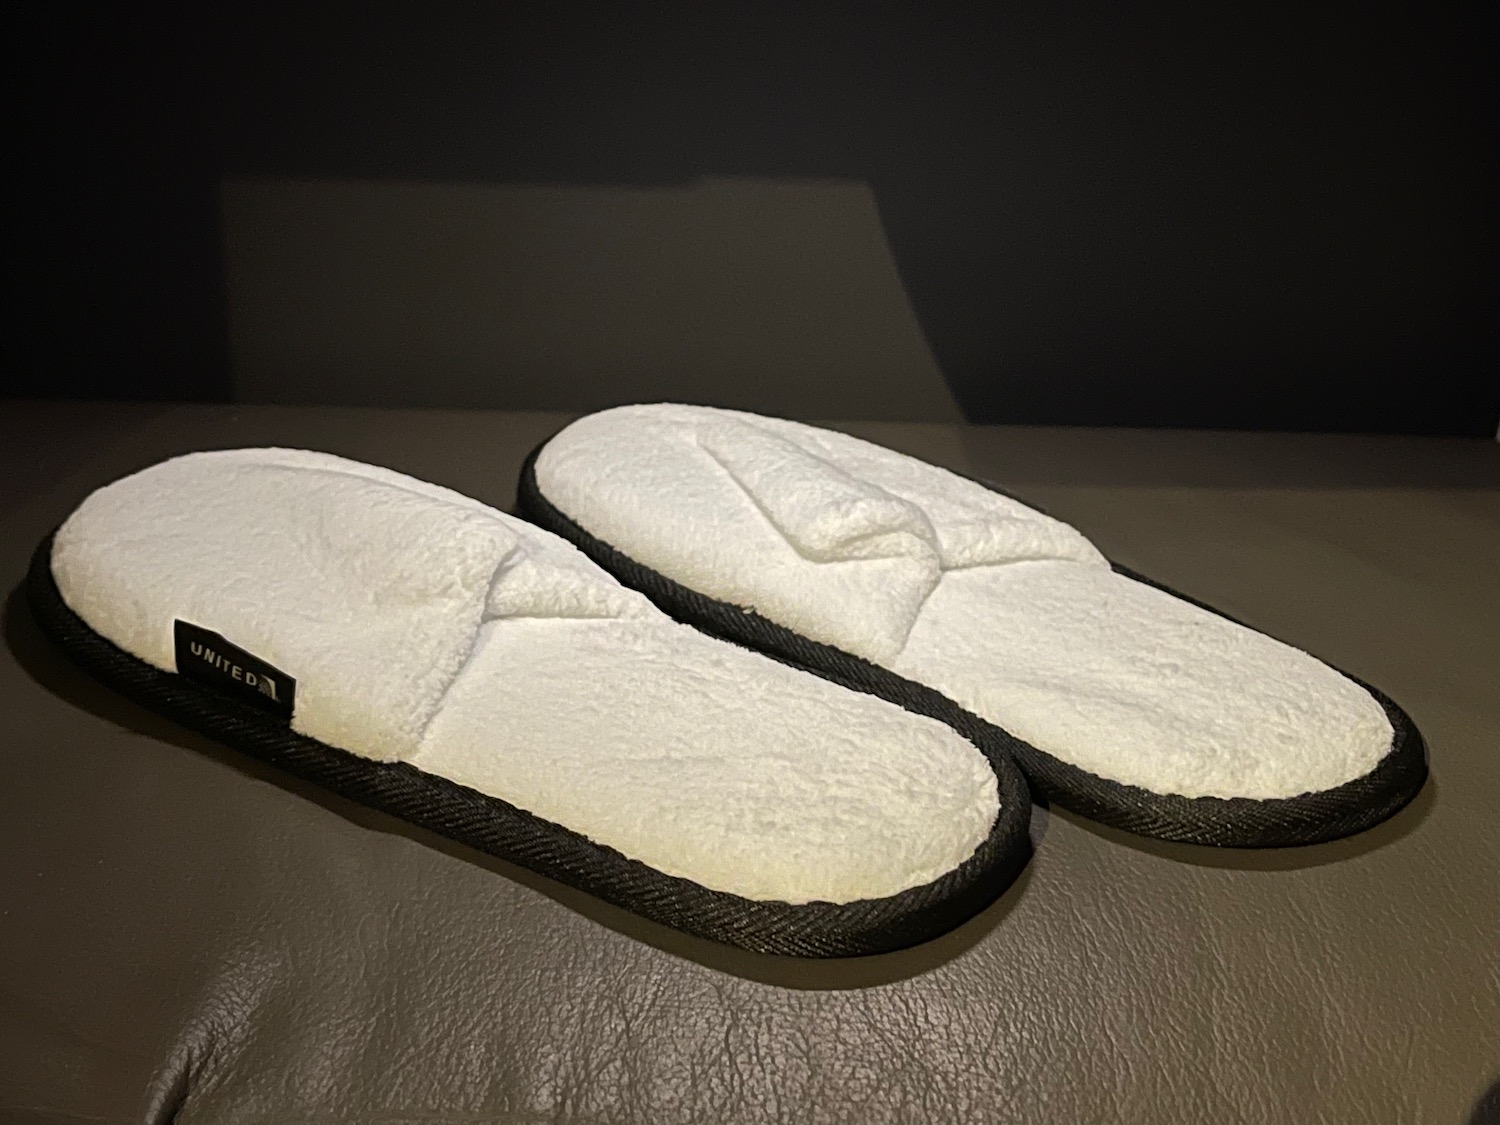 a pair of white slippers